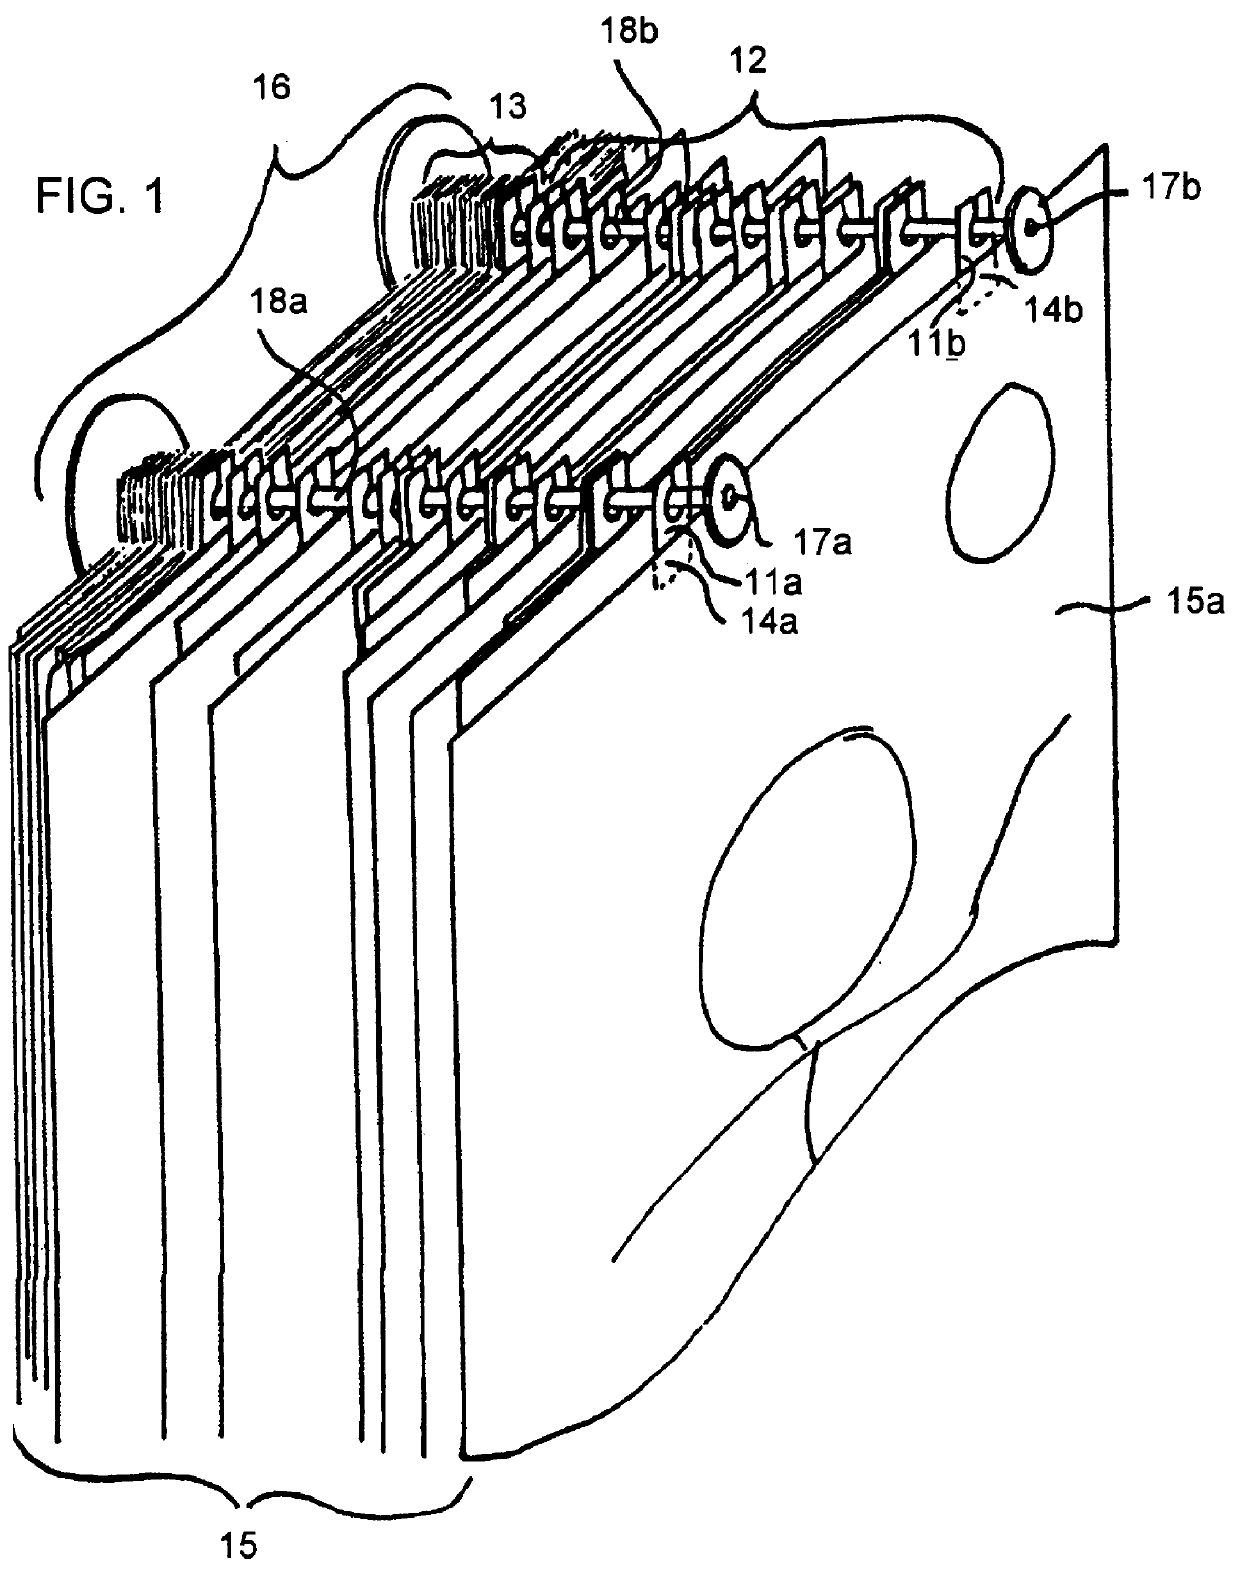 Support device for hanging sheetlike objects using thin support tabs